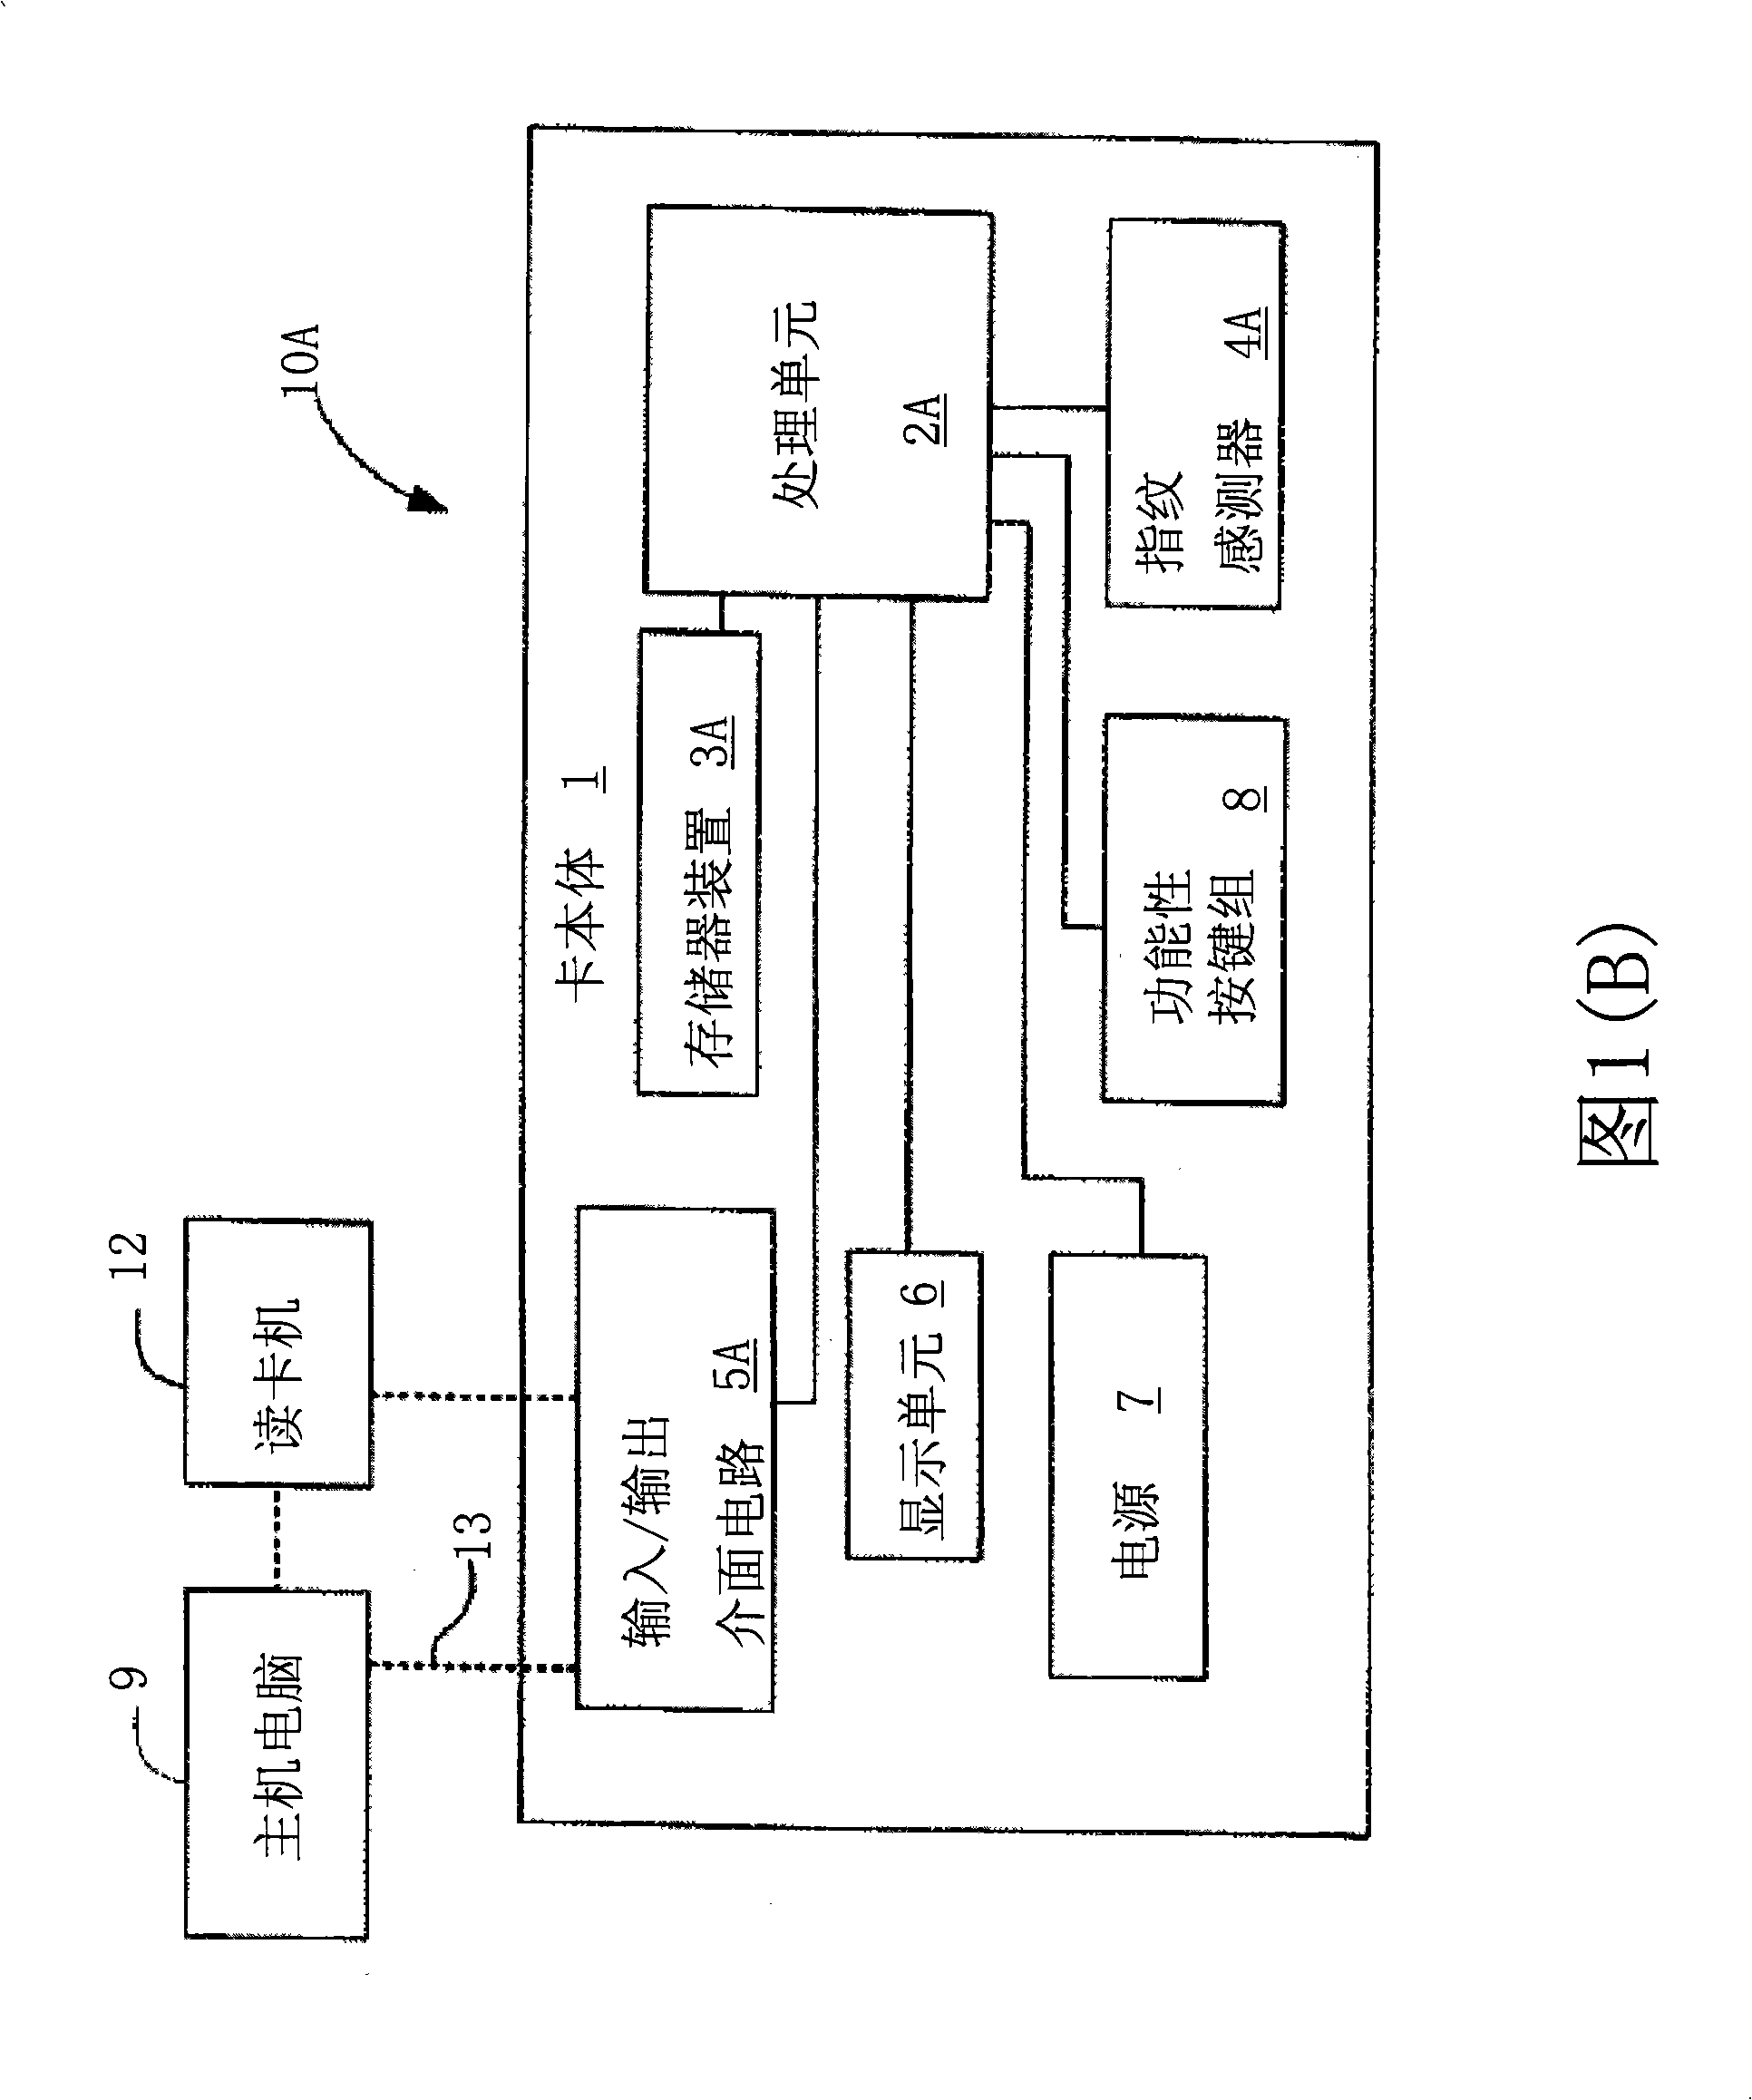 Method for formatting/testing general sequence bus device